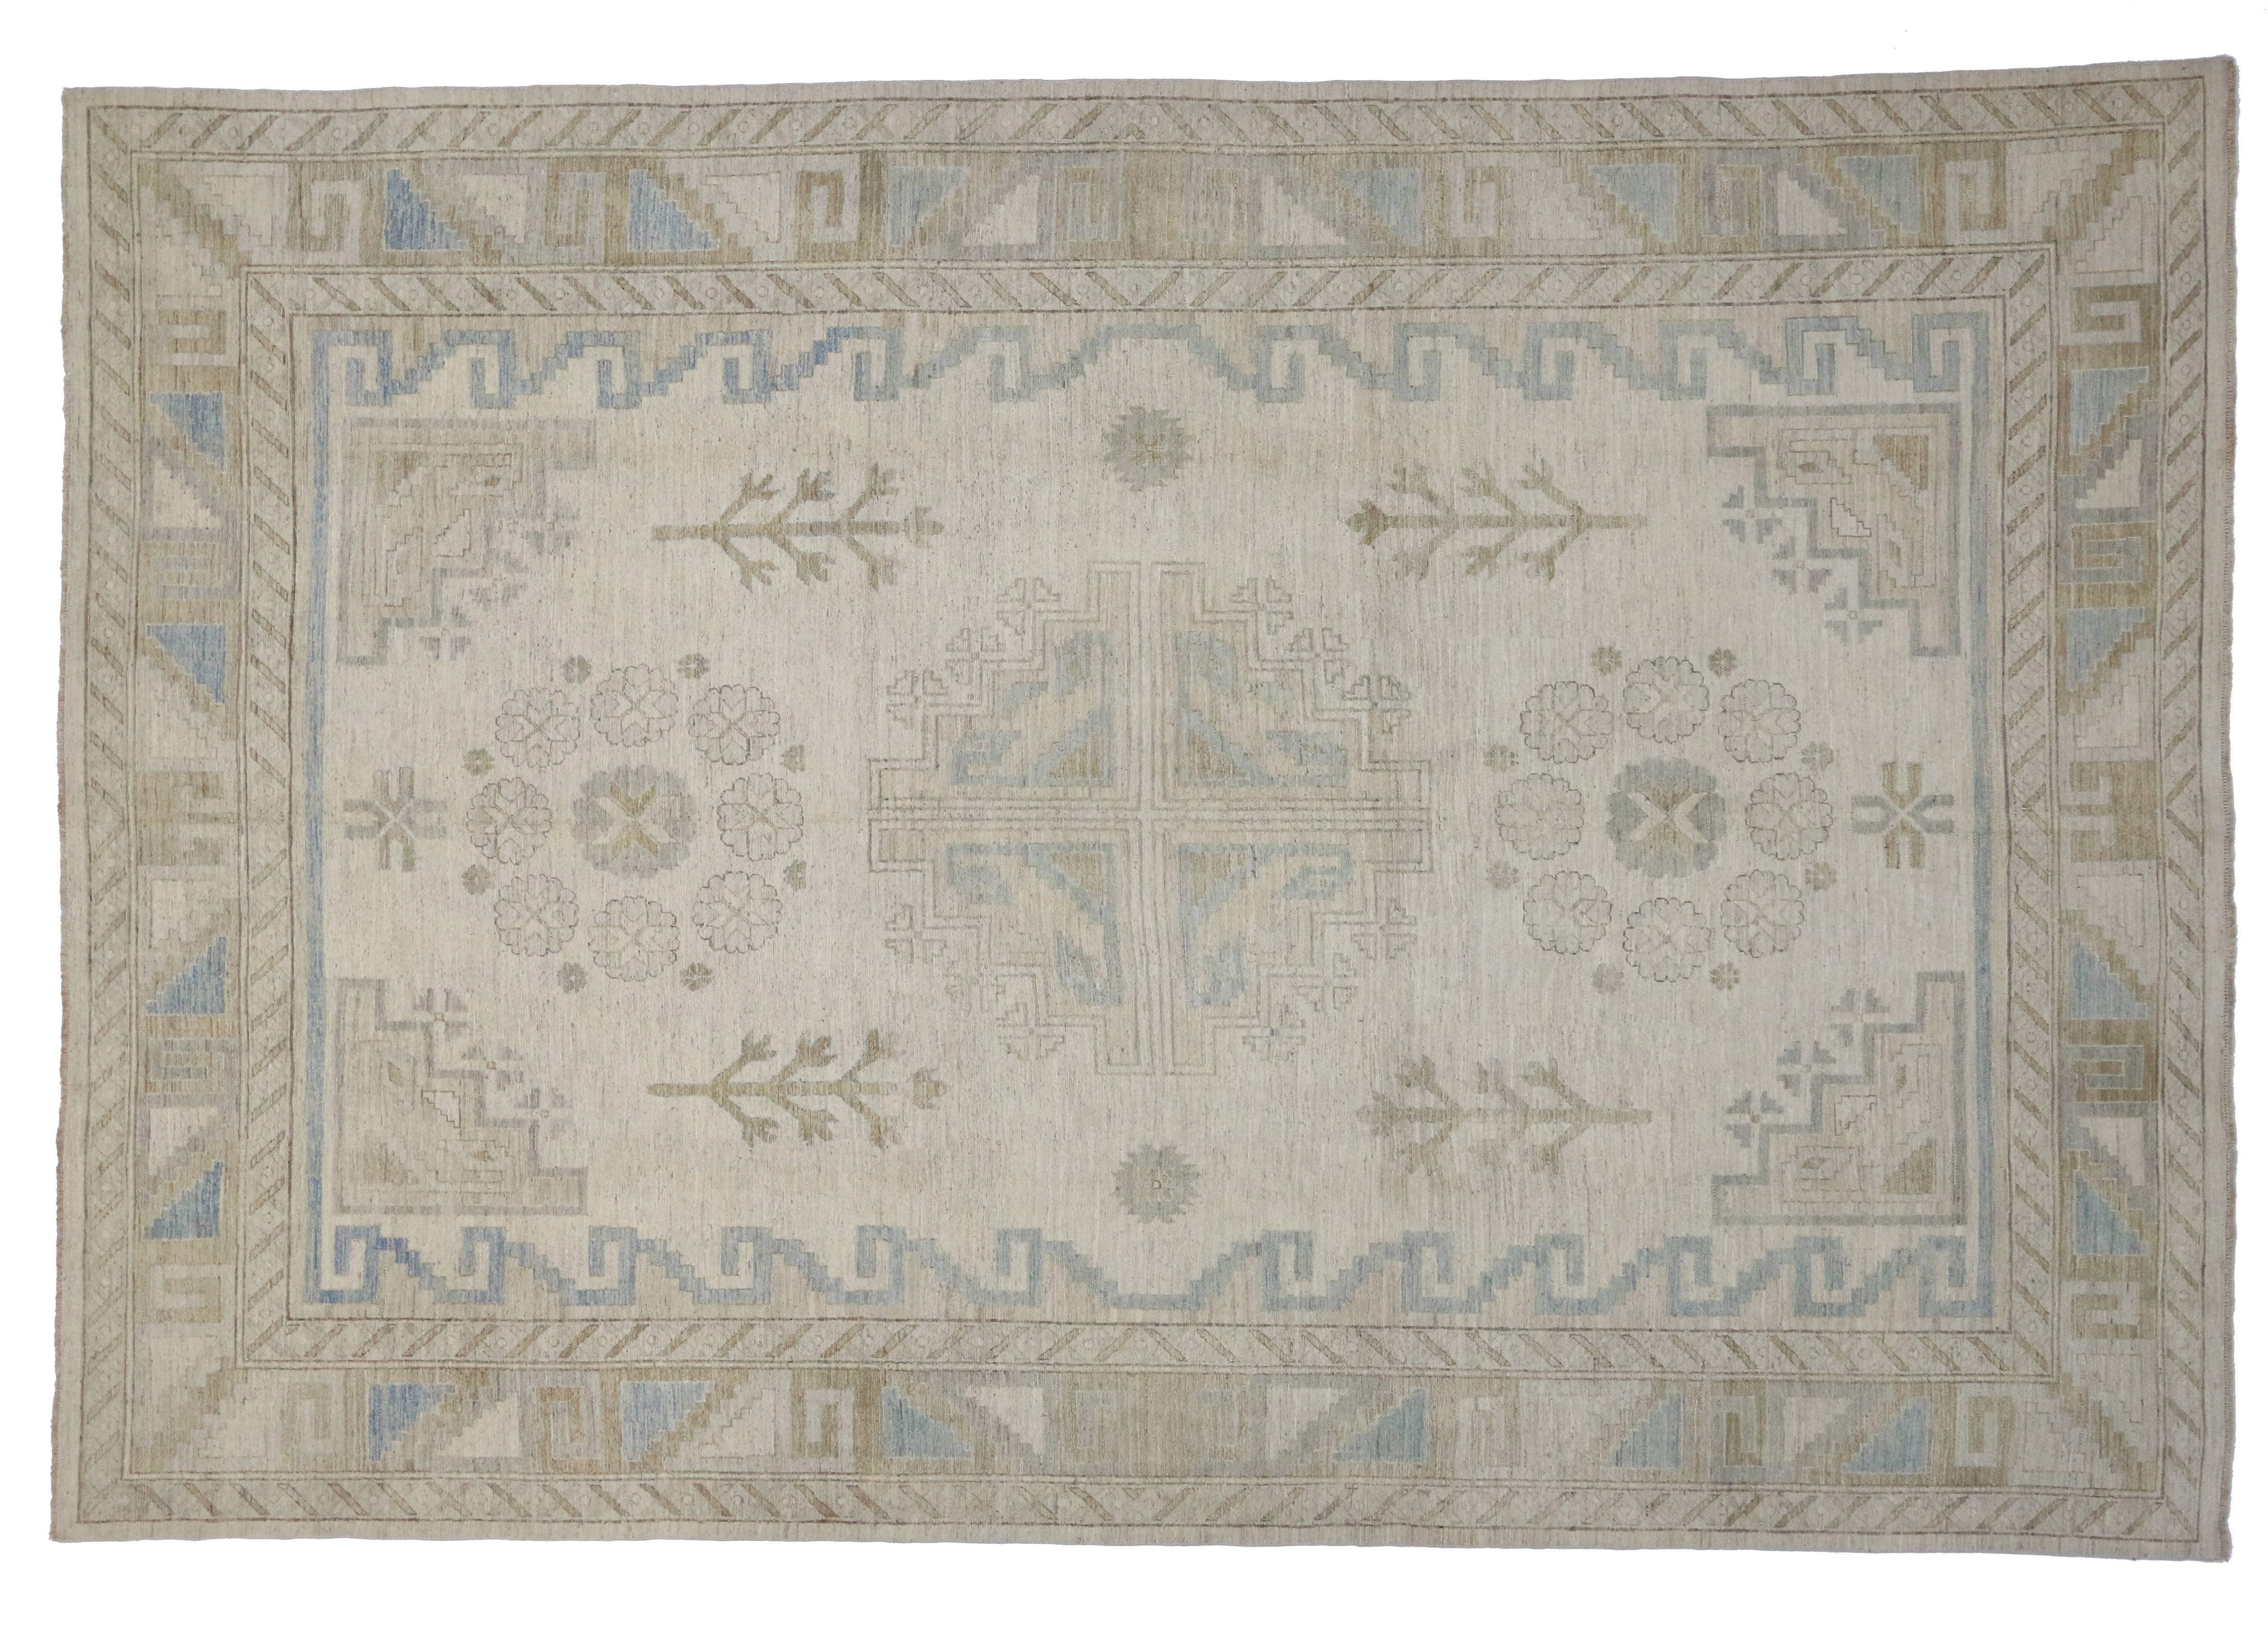 New Transitional Area Rug with Khotan Design in Warm, Neutral Colors 4